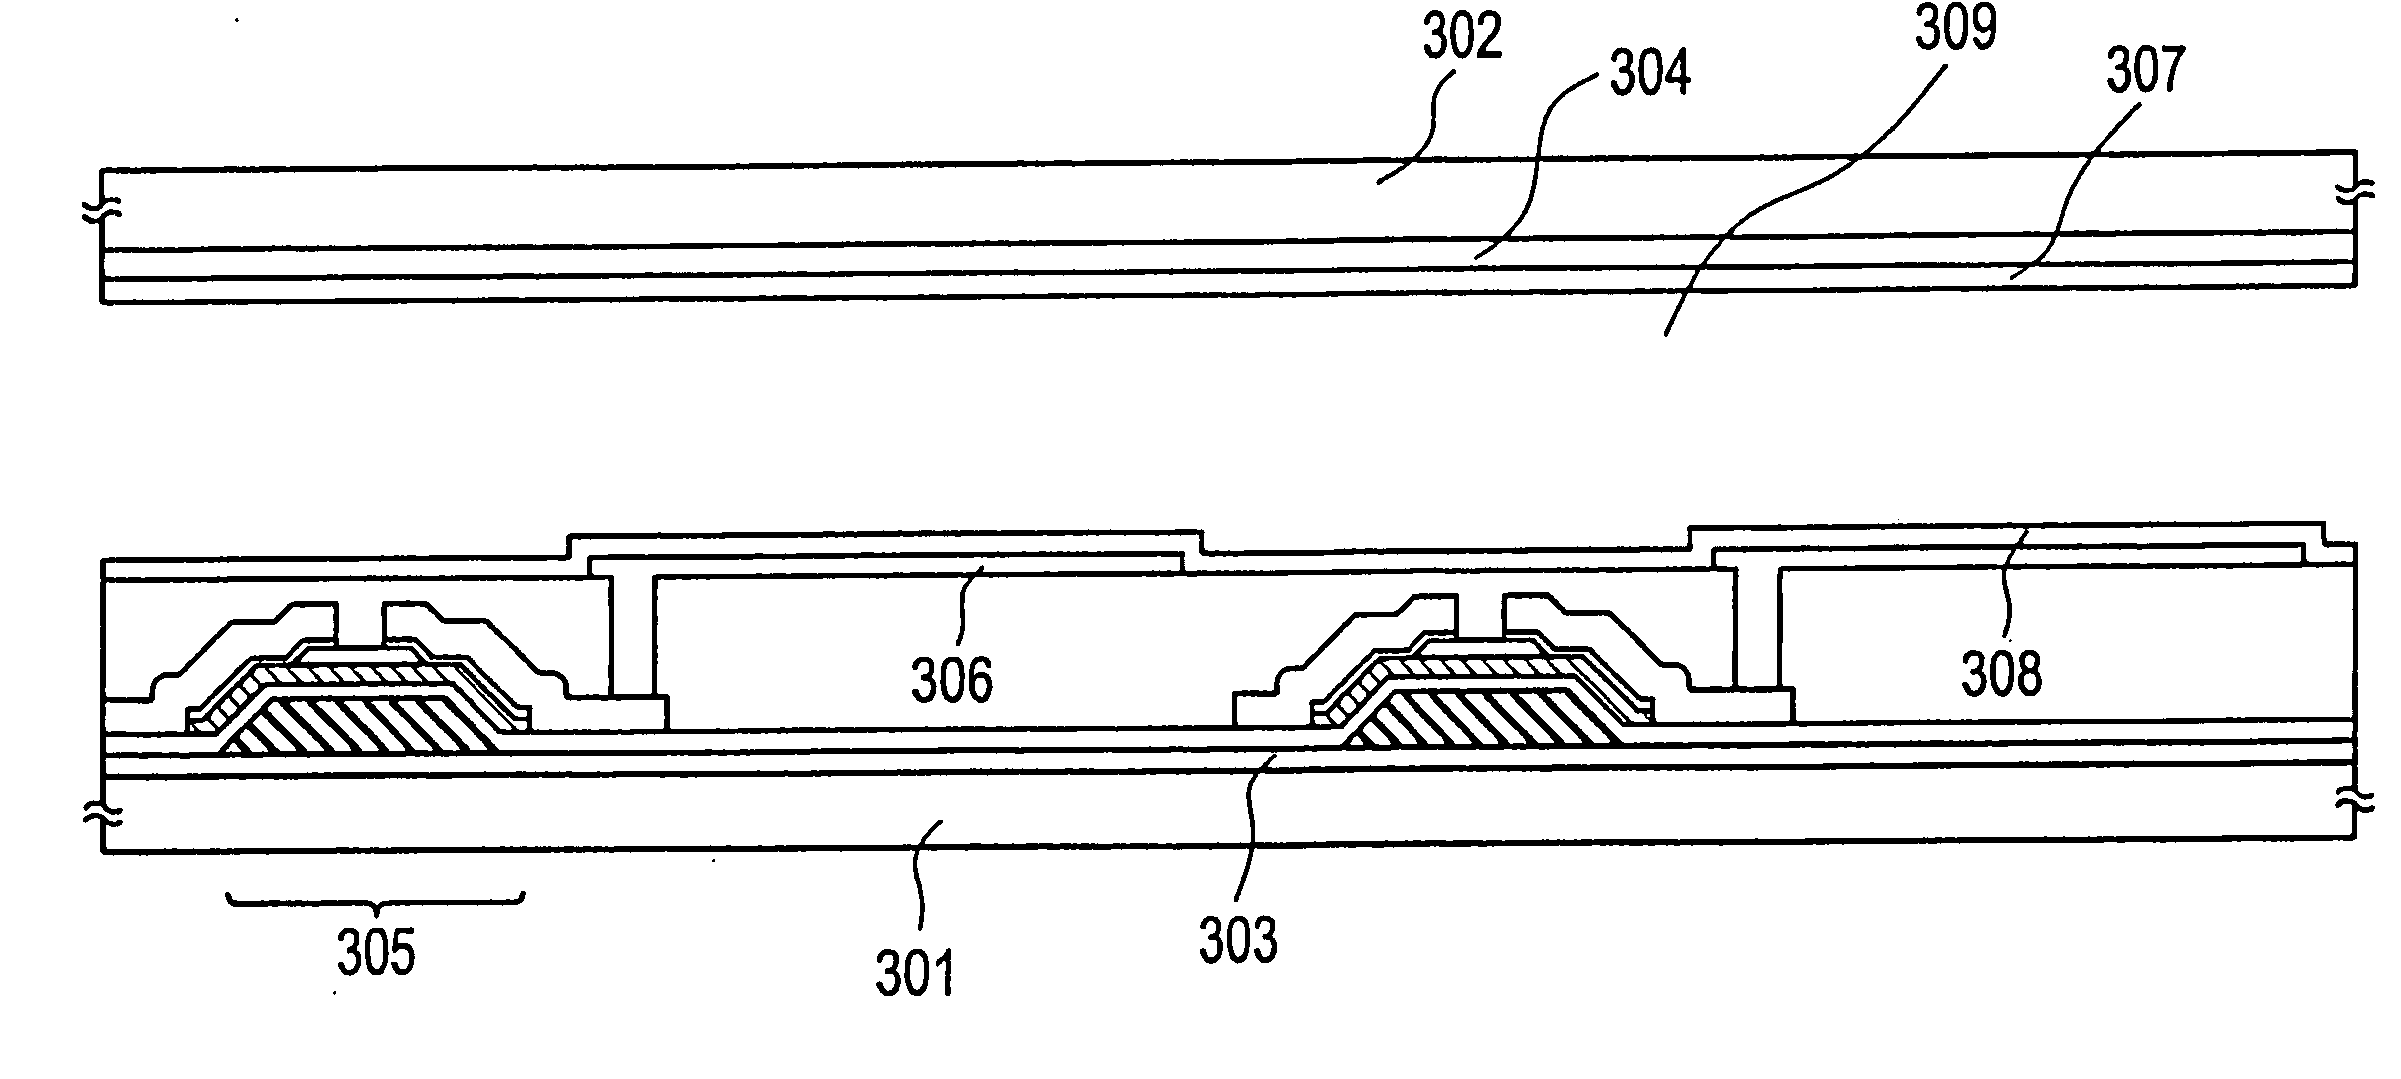 Semiconductor device, method of fabricating same, and electrooptical device